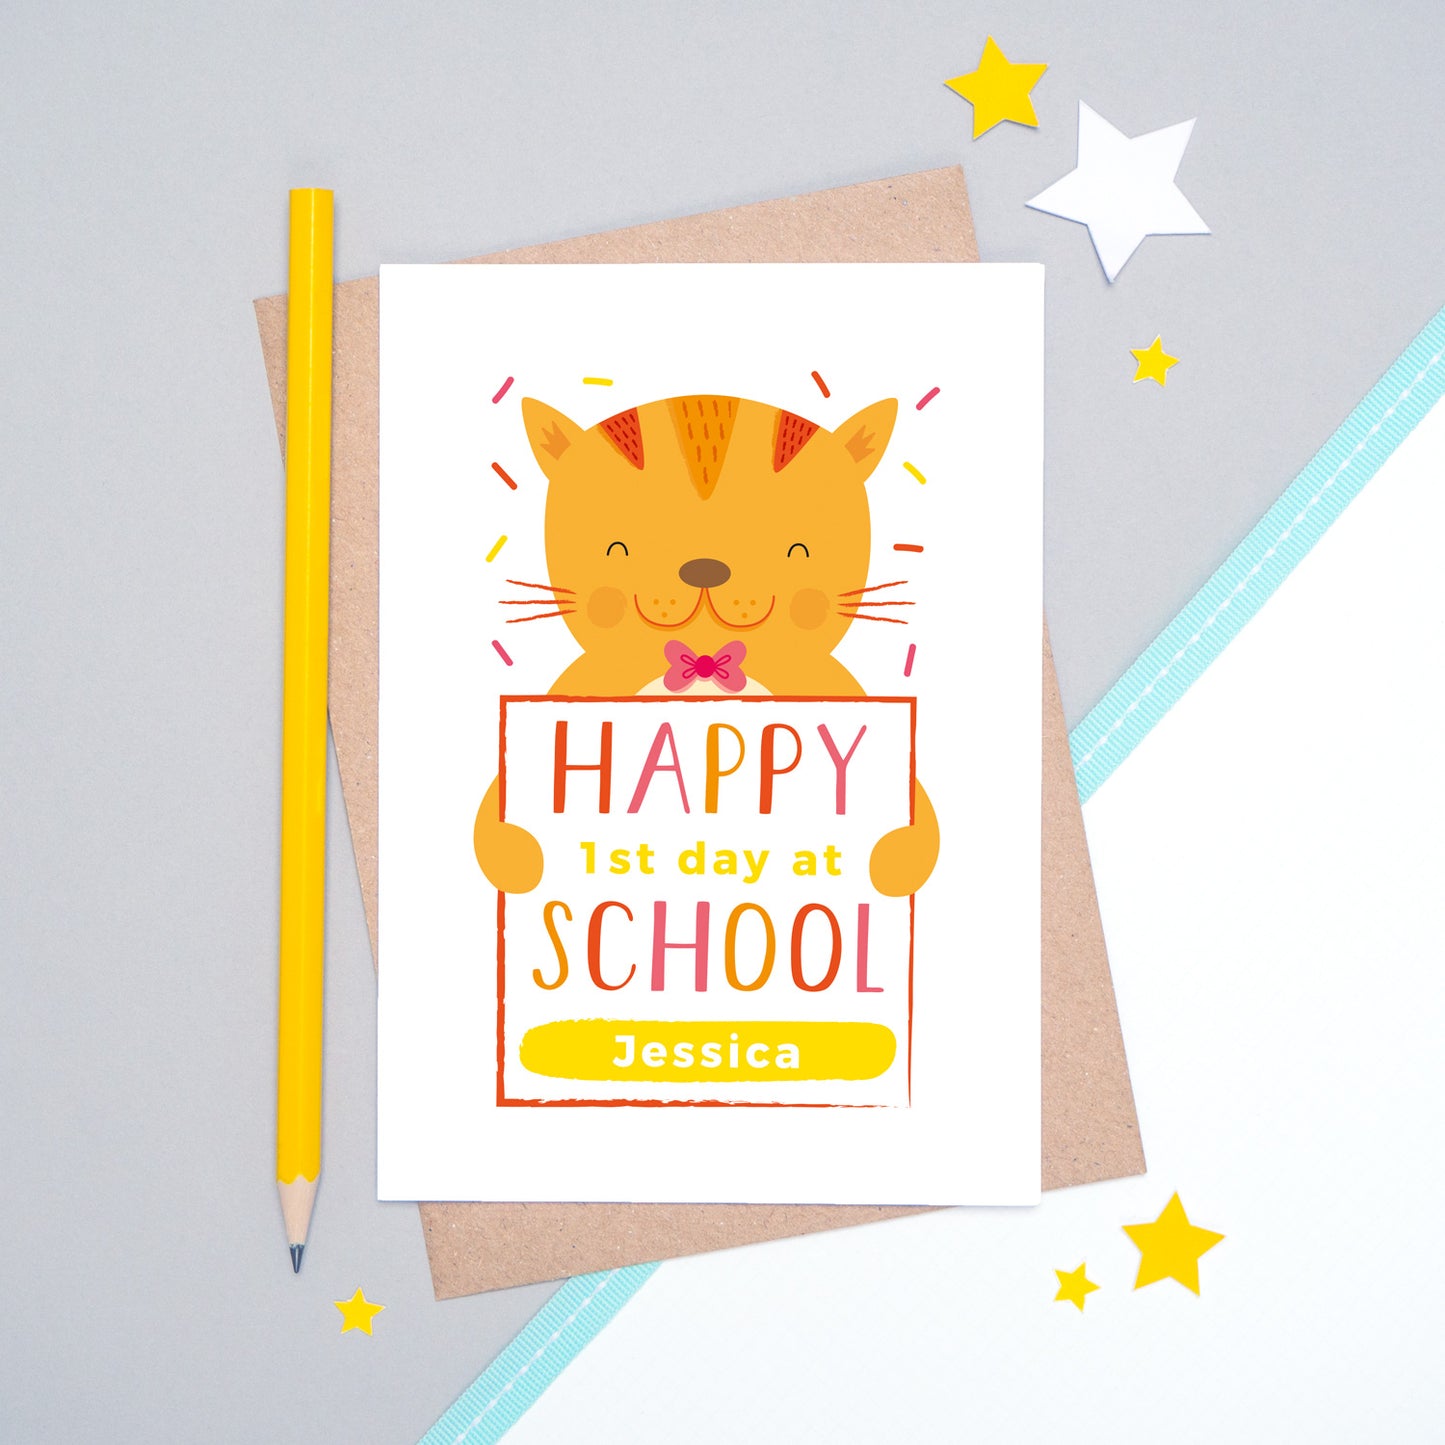 A happy 1st day at school personalised card featuring a friendly orange cat sat on a grey and white background.